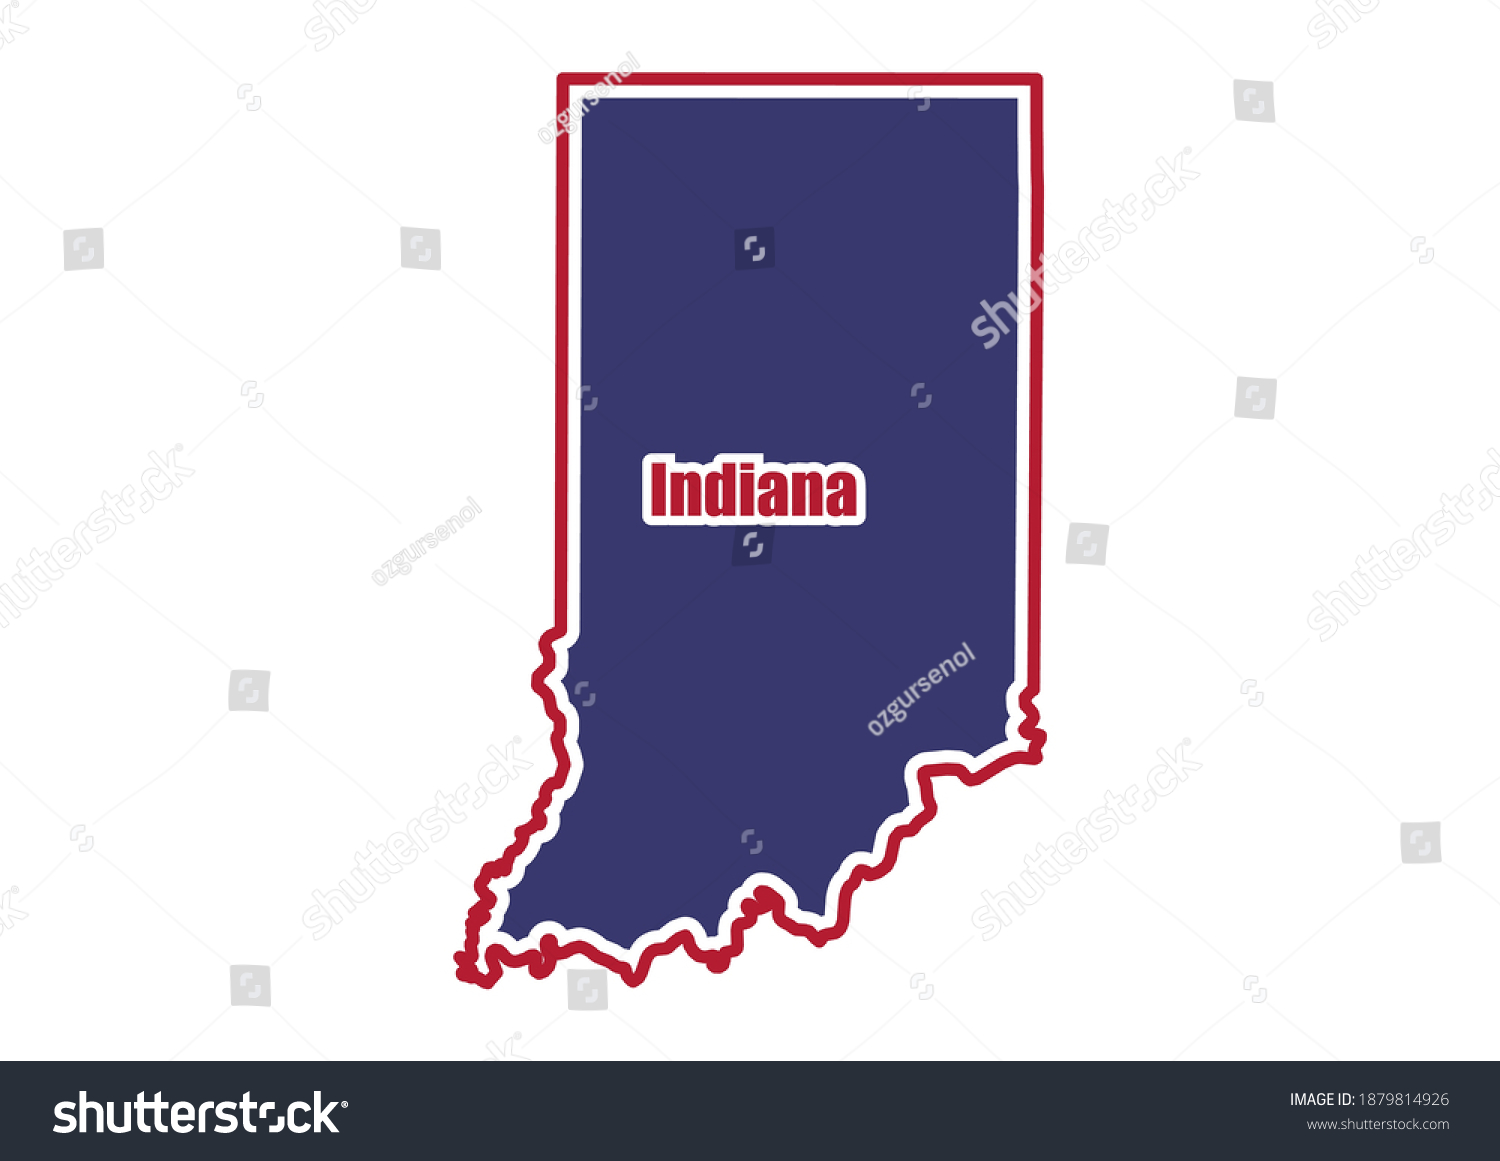 Vector map of Indiana.  Outlines, state borders are painted in the colors American flag. Flat vector map of Indiana isolated on white background.  The map is appropriate for prints of any size.  #1879814926